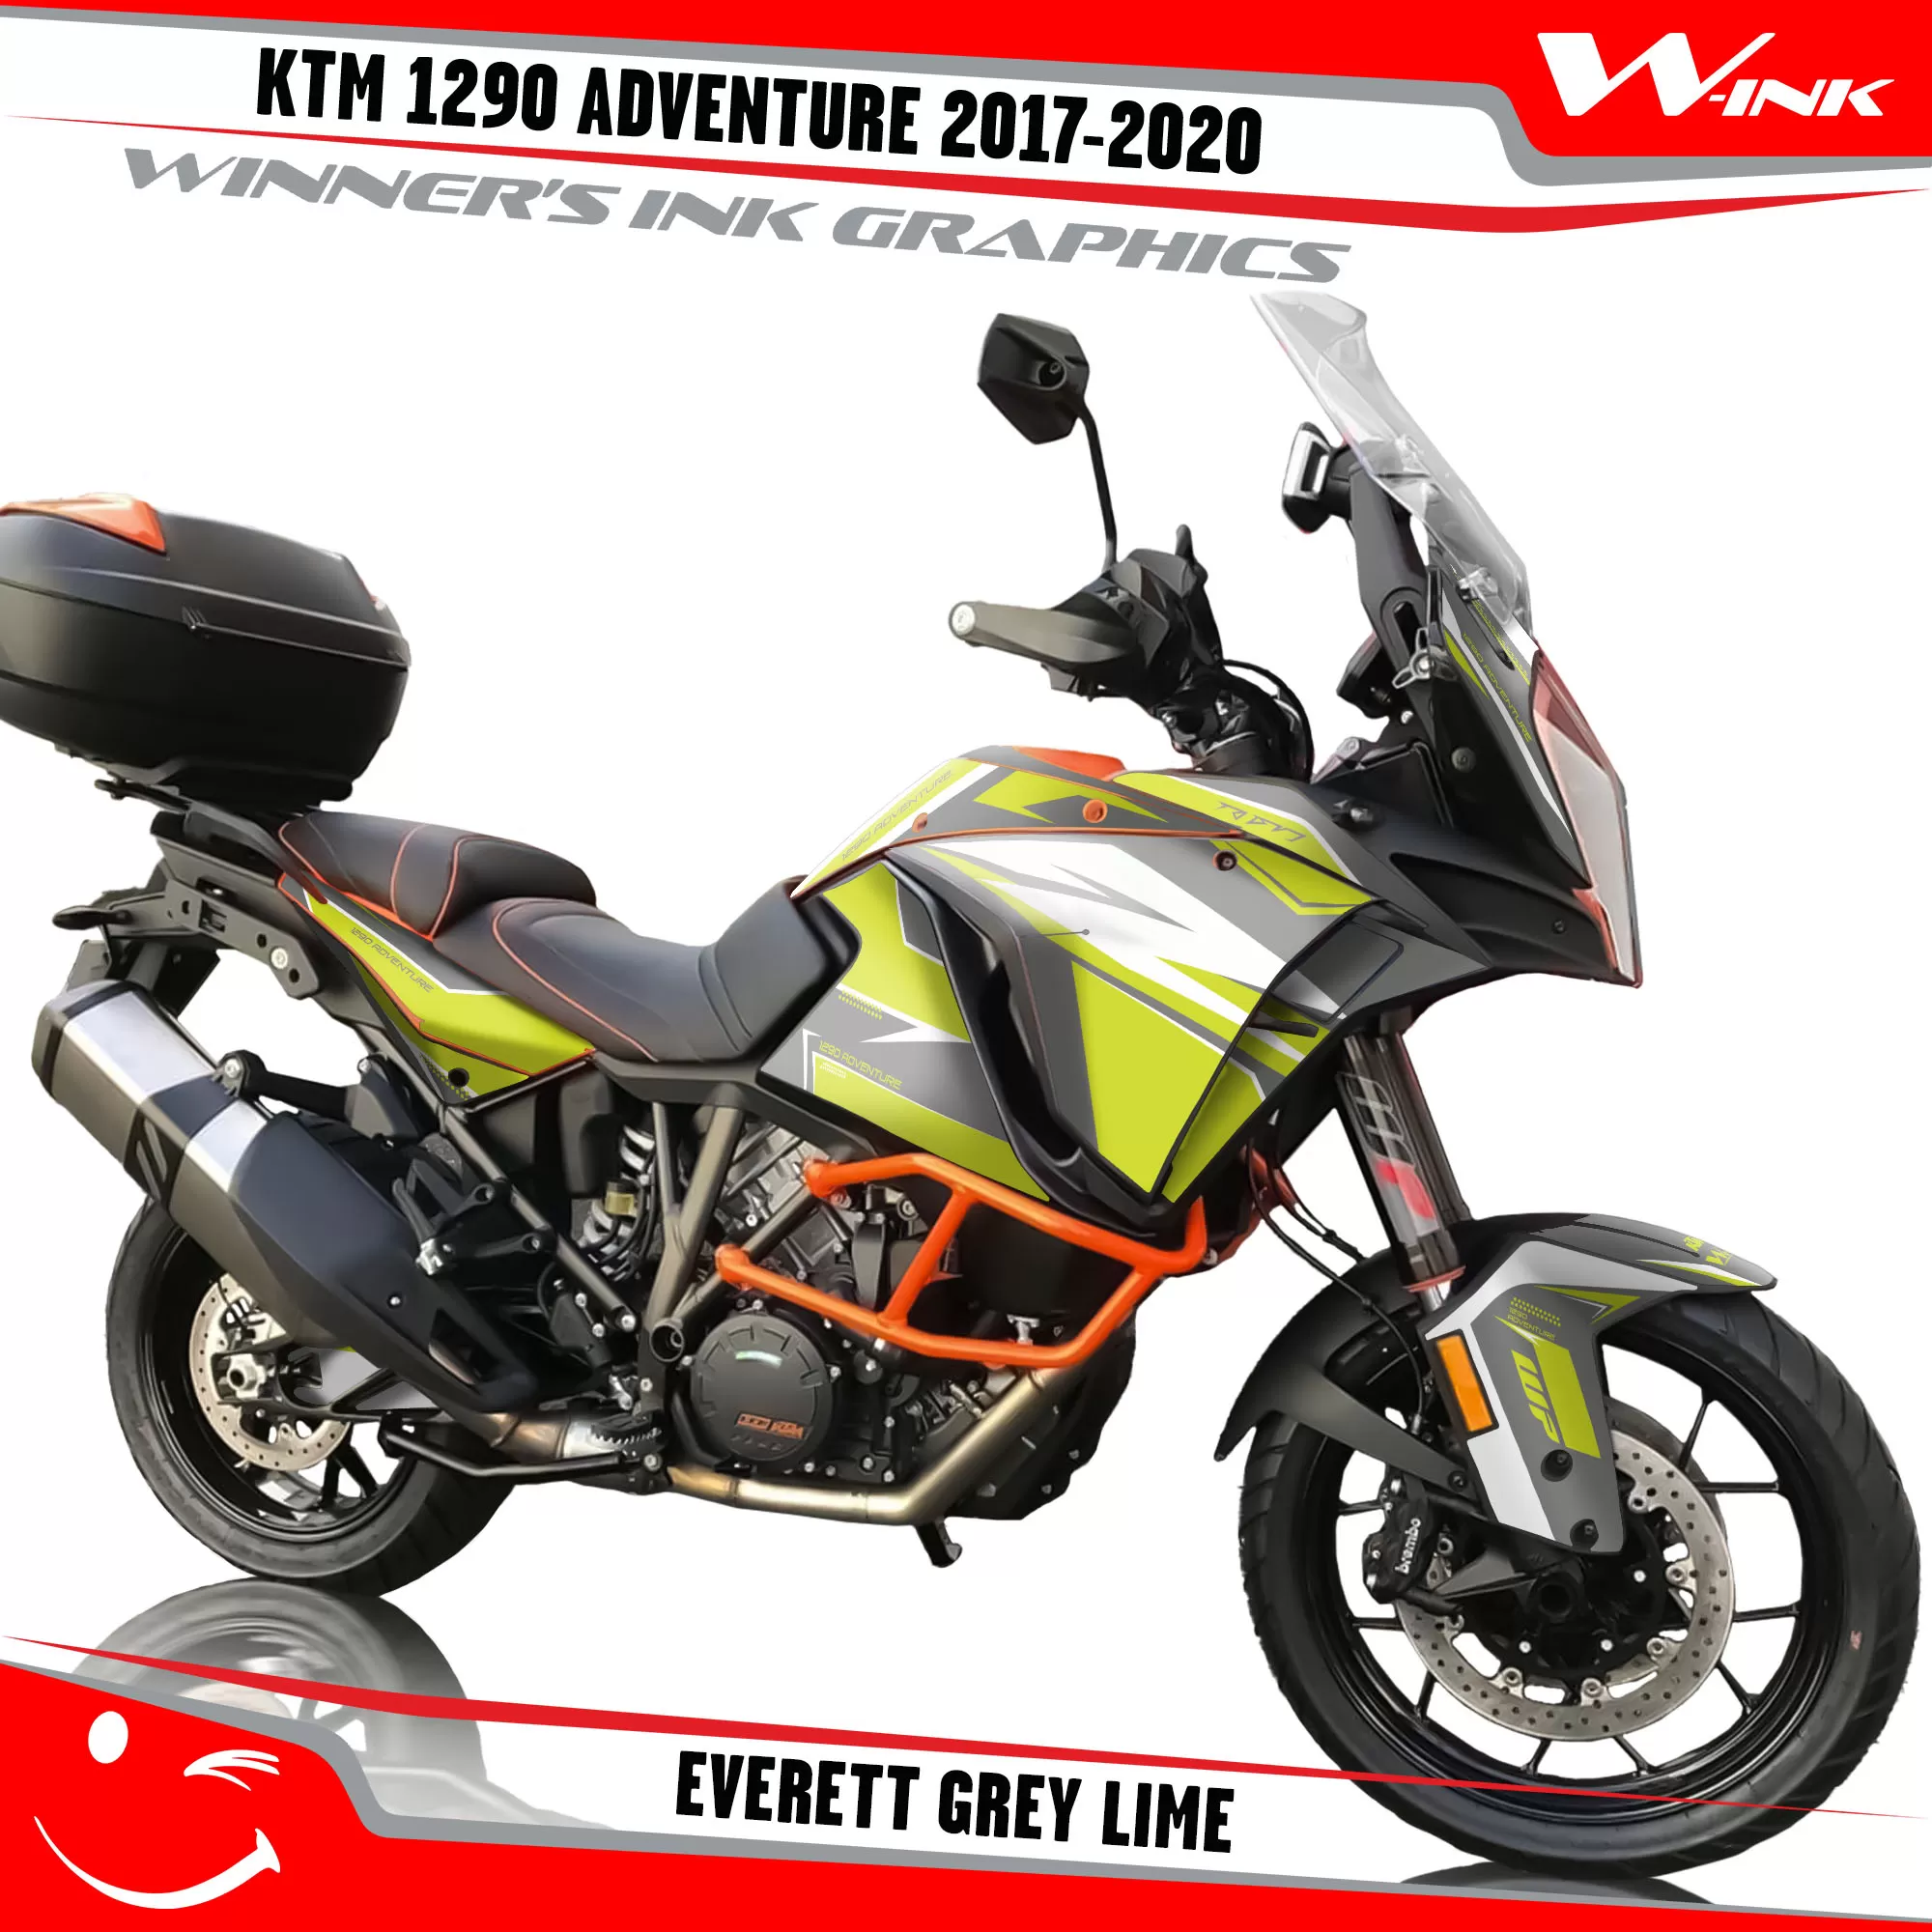 KTM-Adventure-1290-2017-2018-2019-2020-graphics-kit-and-decals-Everett-Grey-Lime